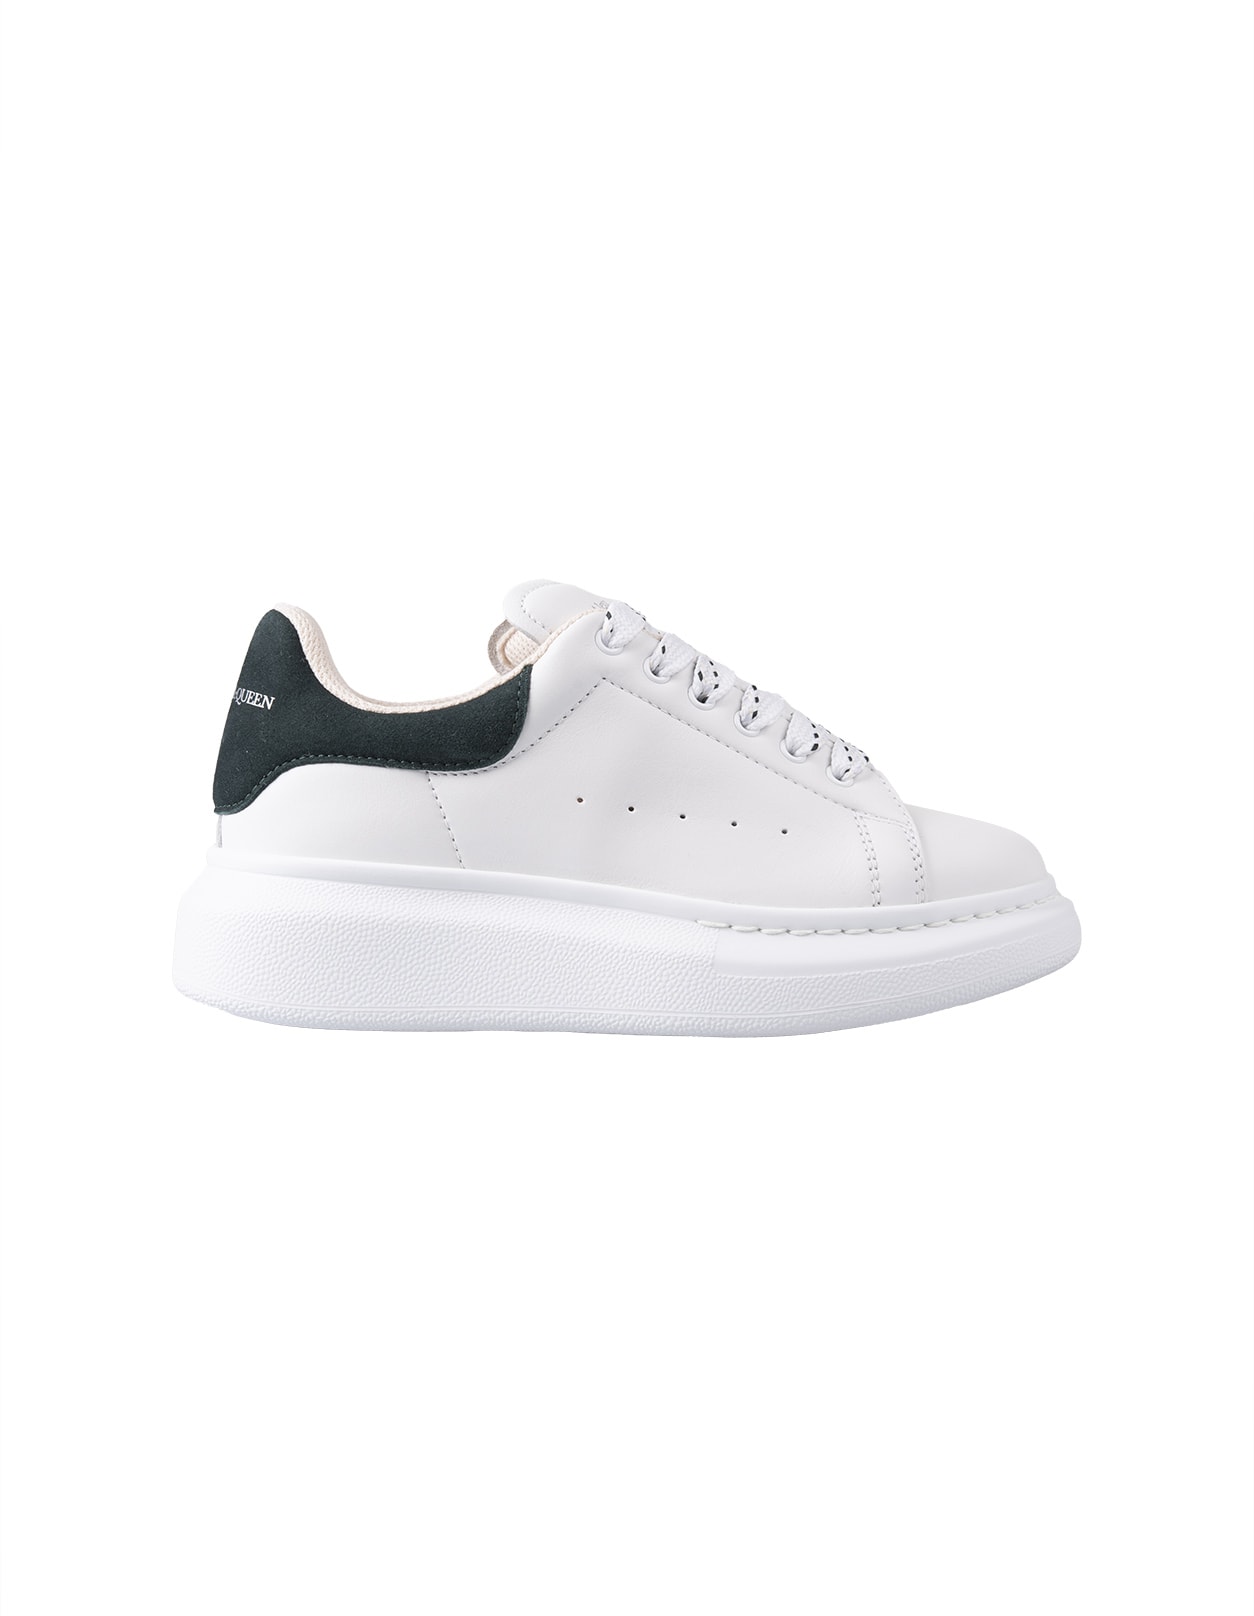 ALEXANDER MCQUEEN WHITE OVERSIZE SNEAKERS WITH FOREST GREEN SUEDE SPOILER